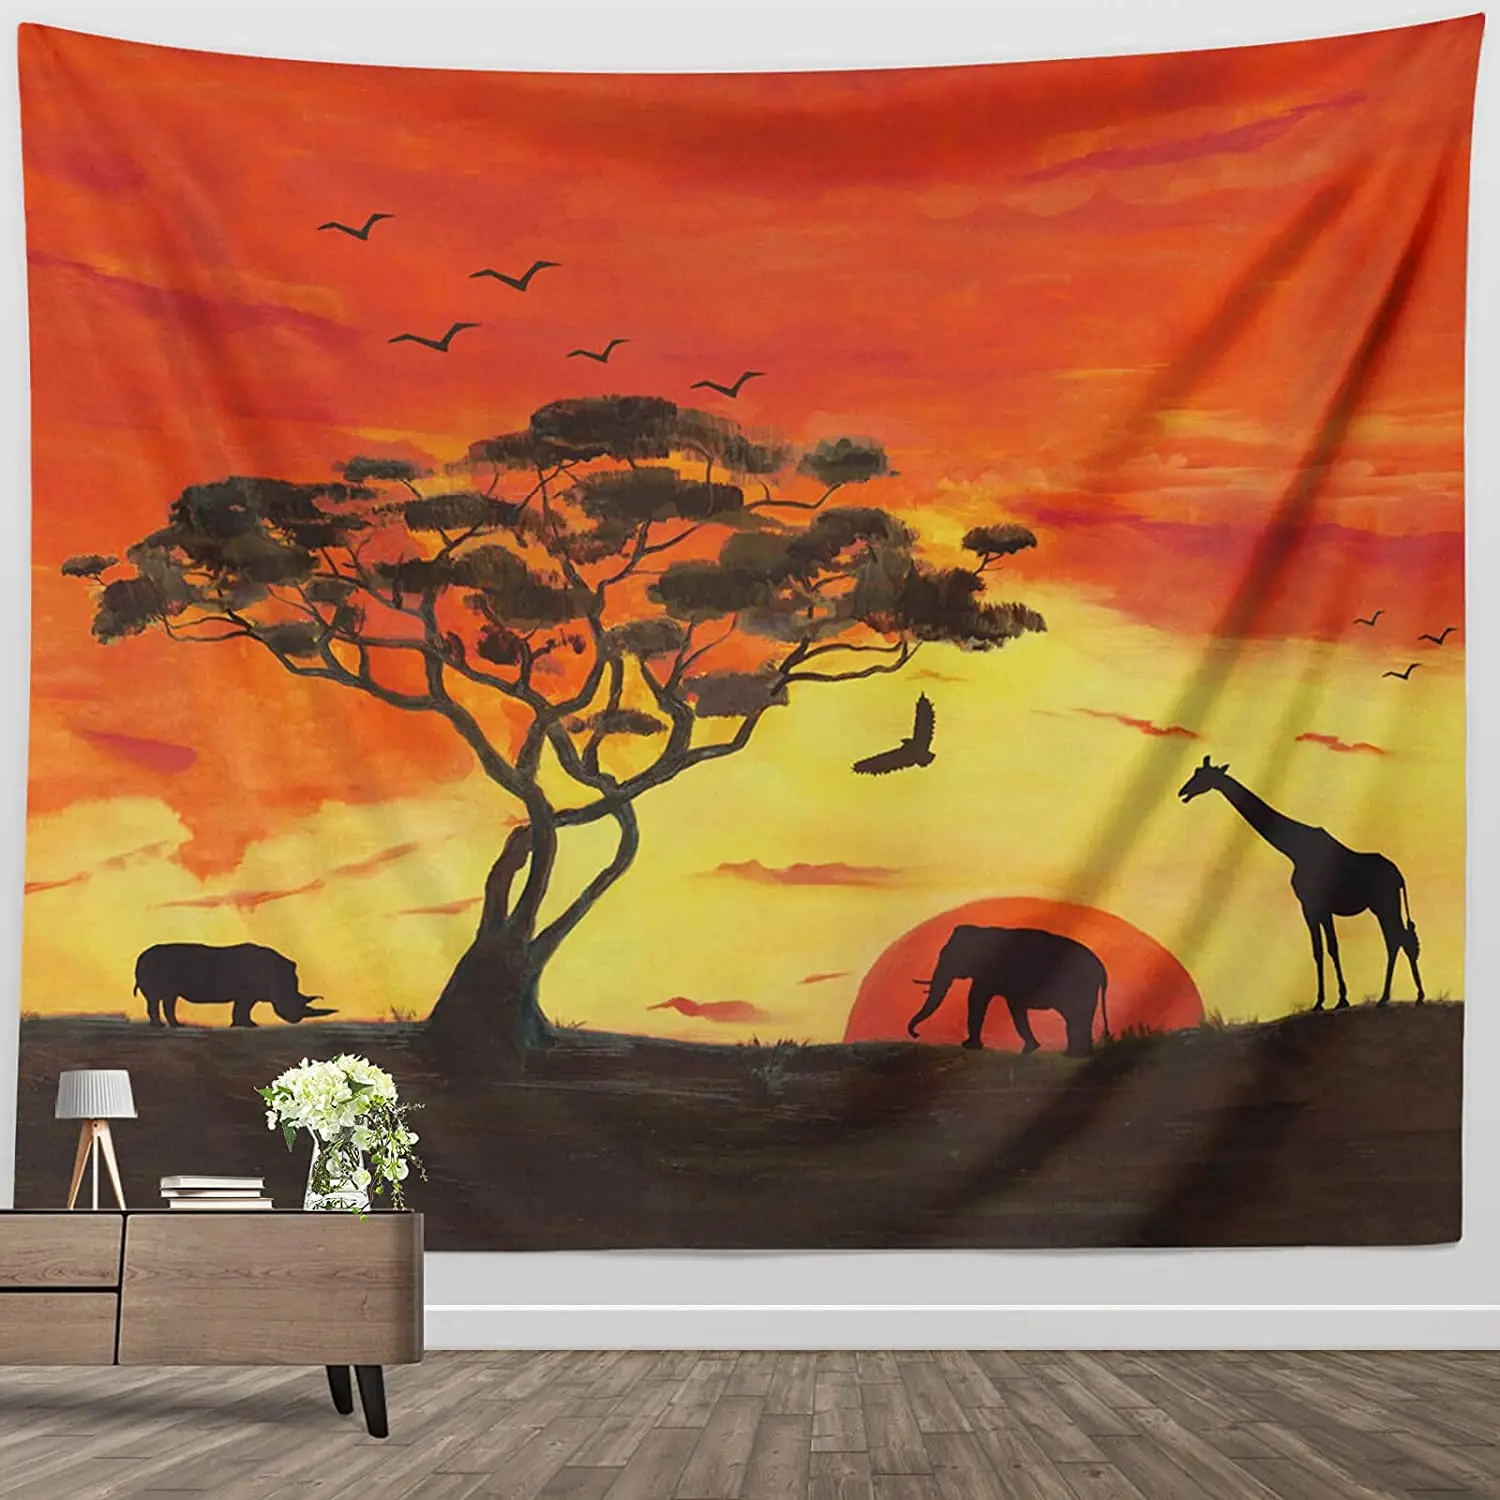 

Animal Wall Tapestry Wildlife Tree Sunset Room Tapestries African Wall Hanging Decor for Bedroom Living Room Wall Art Blanket